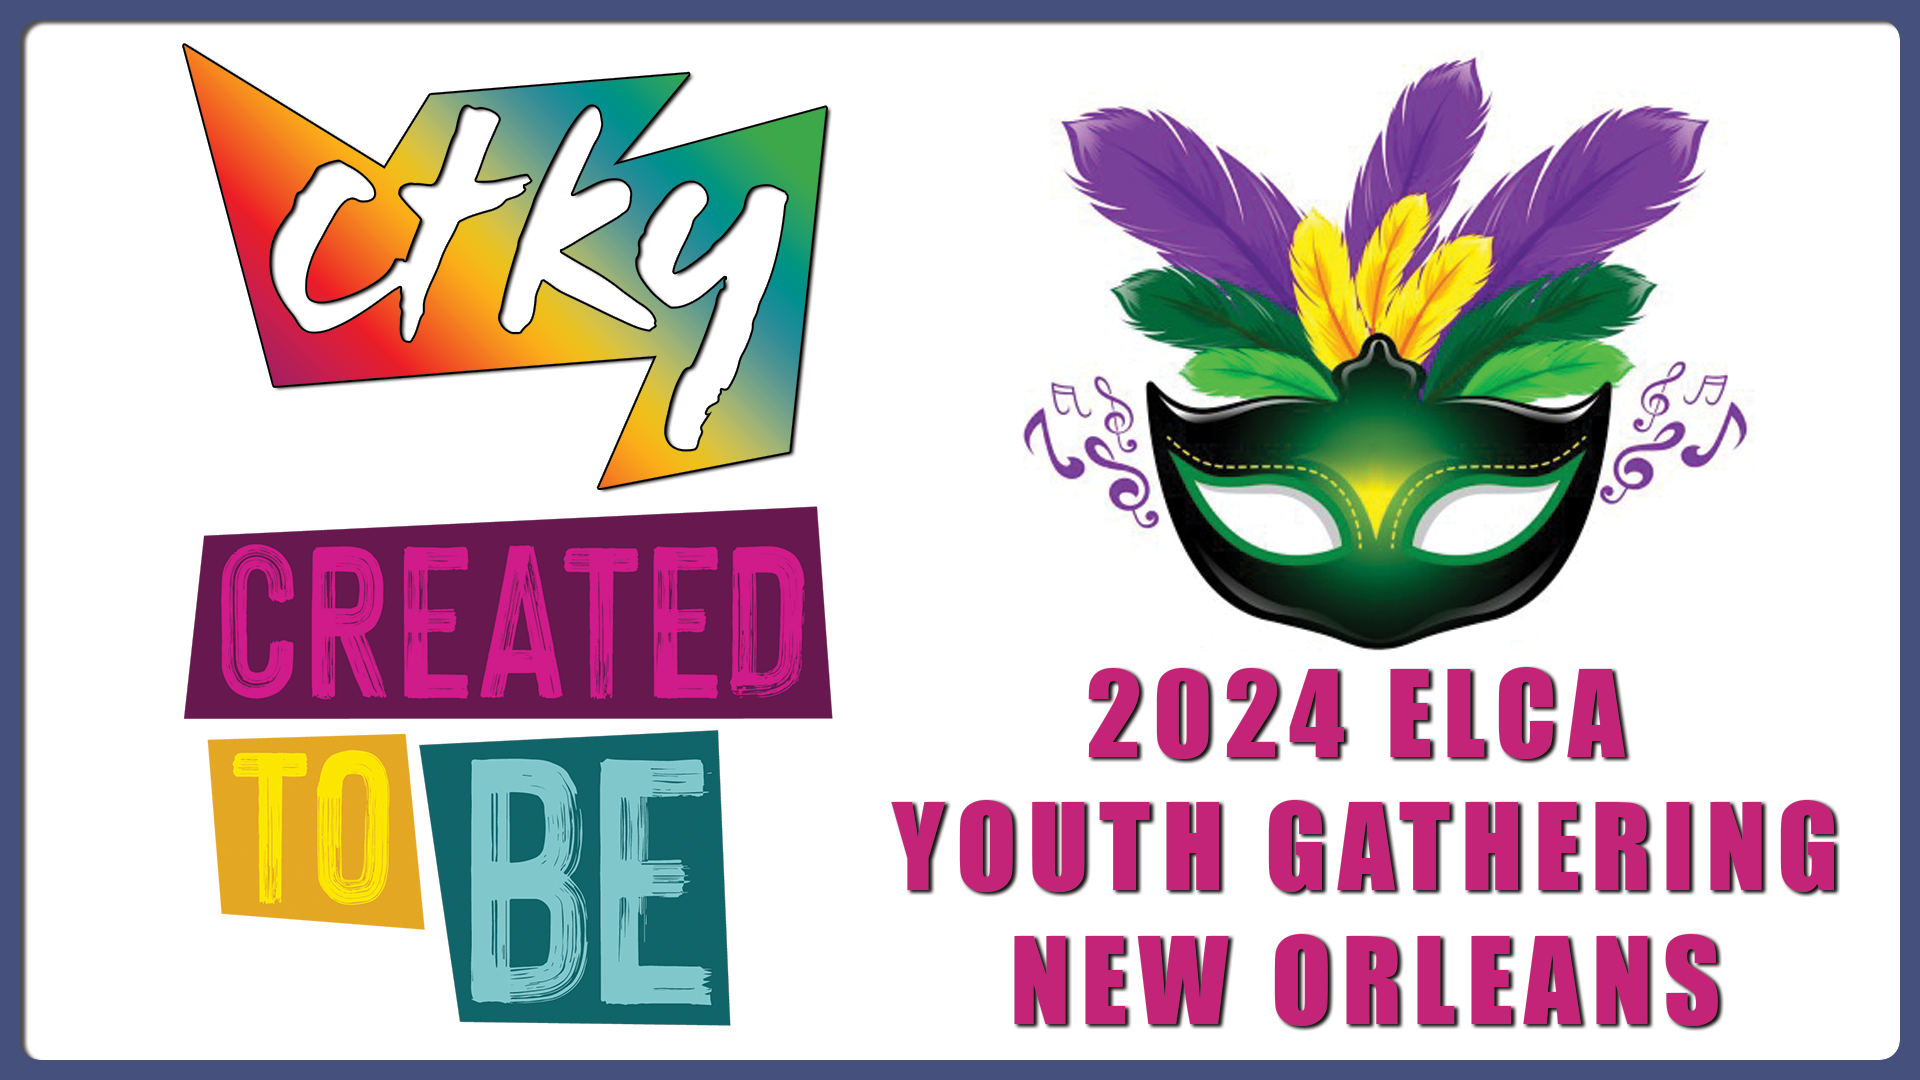 Christ The King Lutheran Church Youth Gathering 2024.png